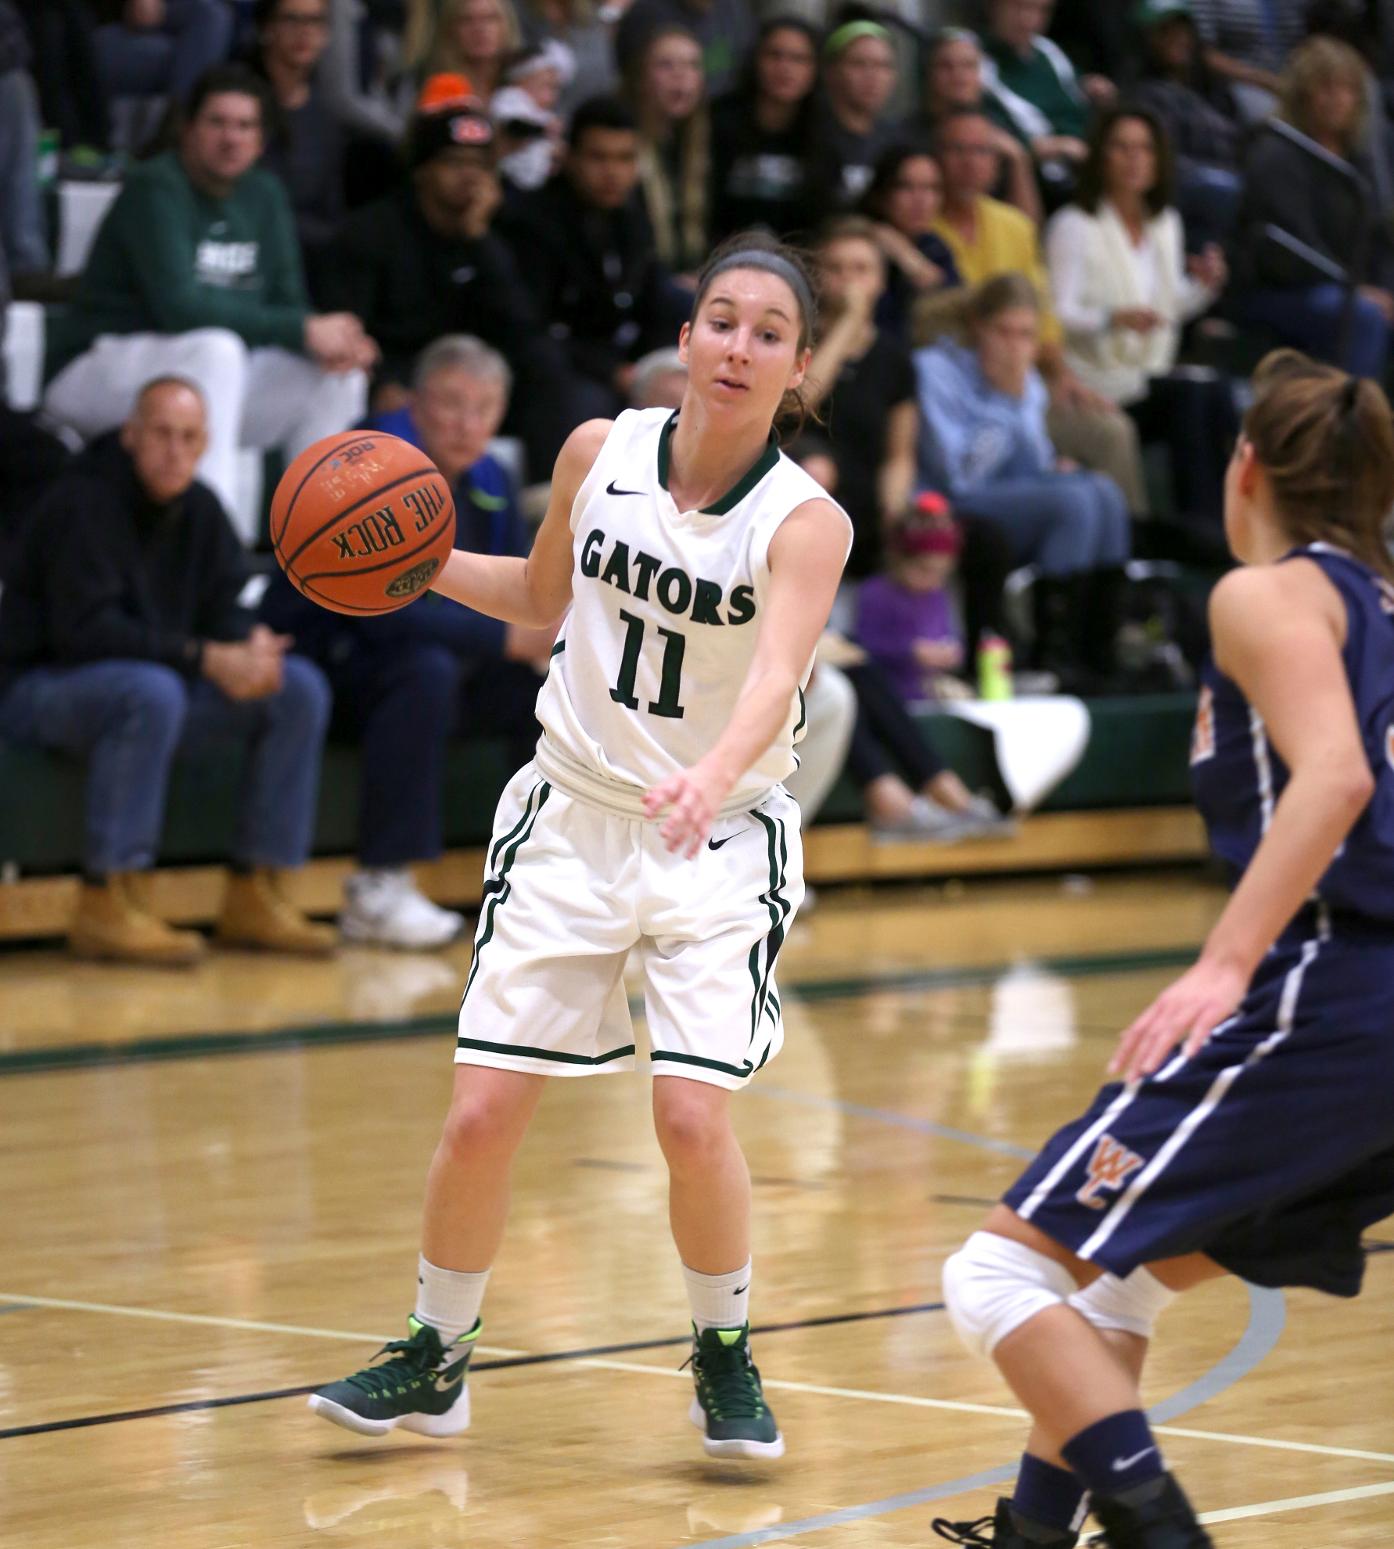 SAGE’S WOMEN’S BASKETBALL SQUAD TRIUMPHS IN OVERTIME, 62-58 OVER MSMC FOR 11th STRAIGHT WIN